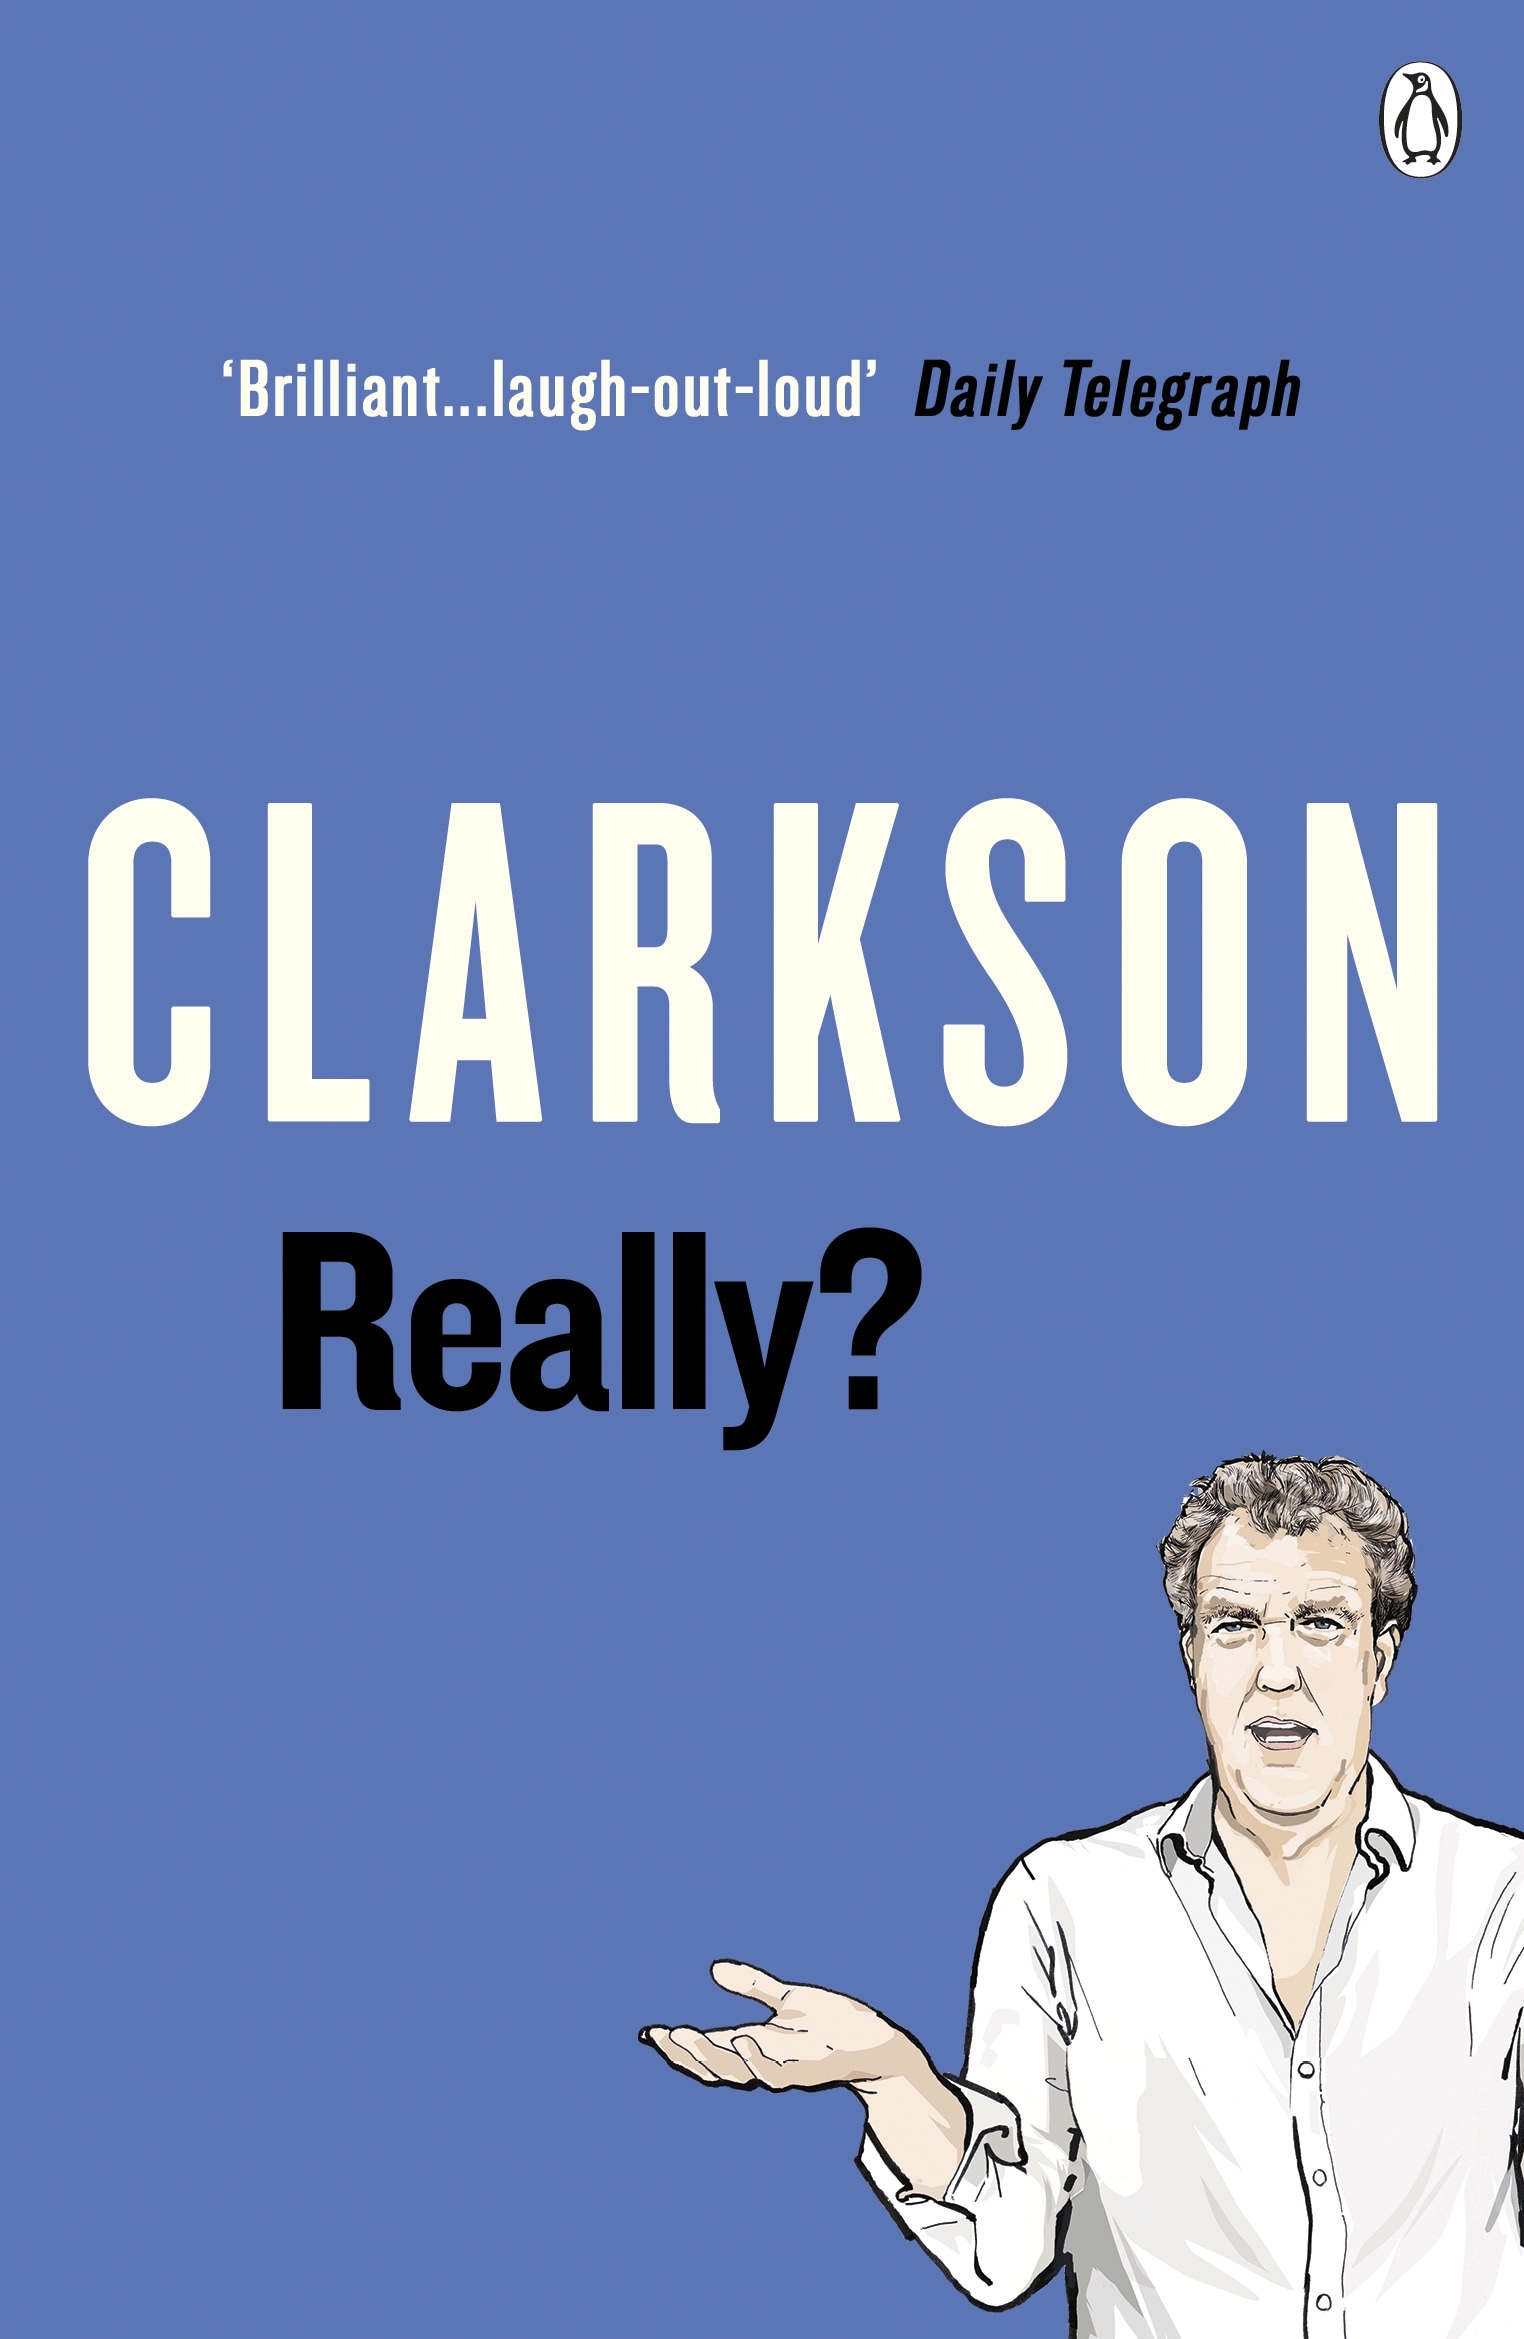 Book “Really?” by Jeremy Clarkson — May 28, 2020